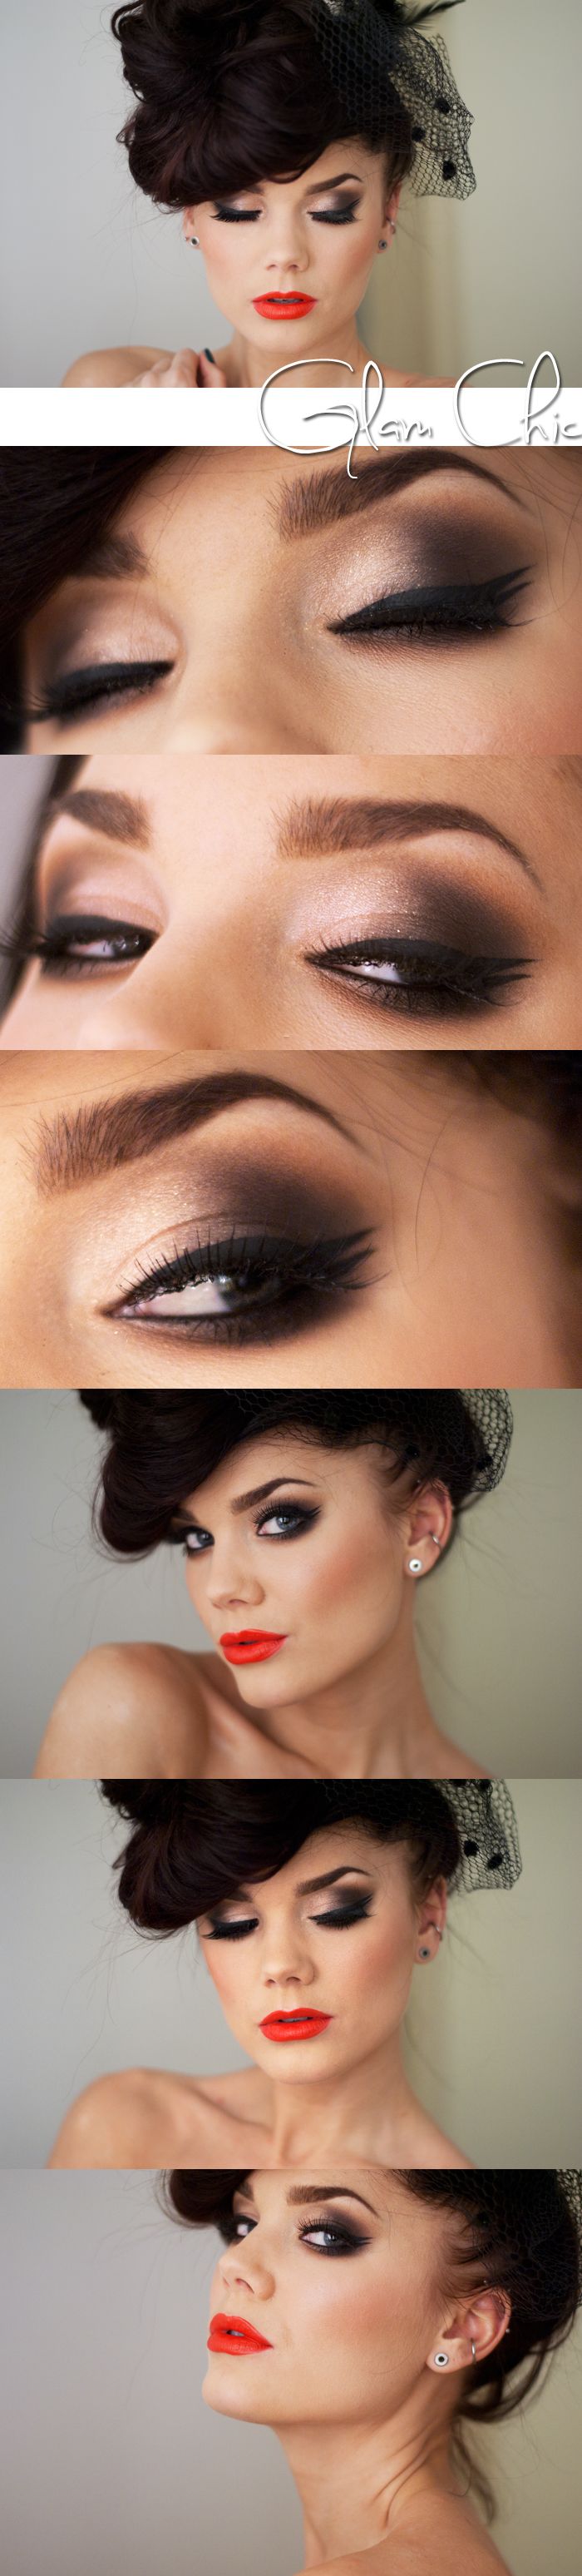 bombshell make-up. love this!